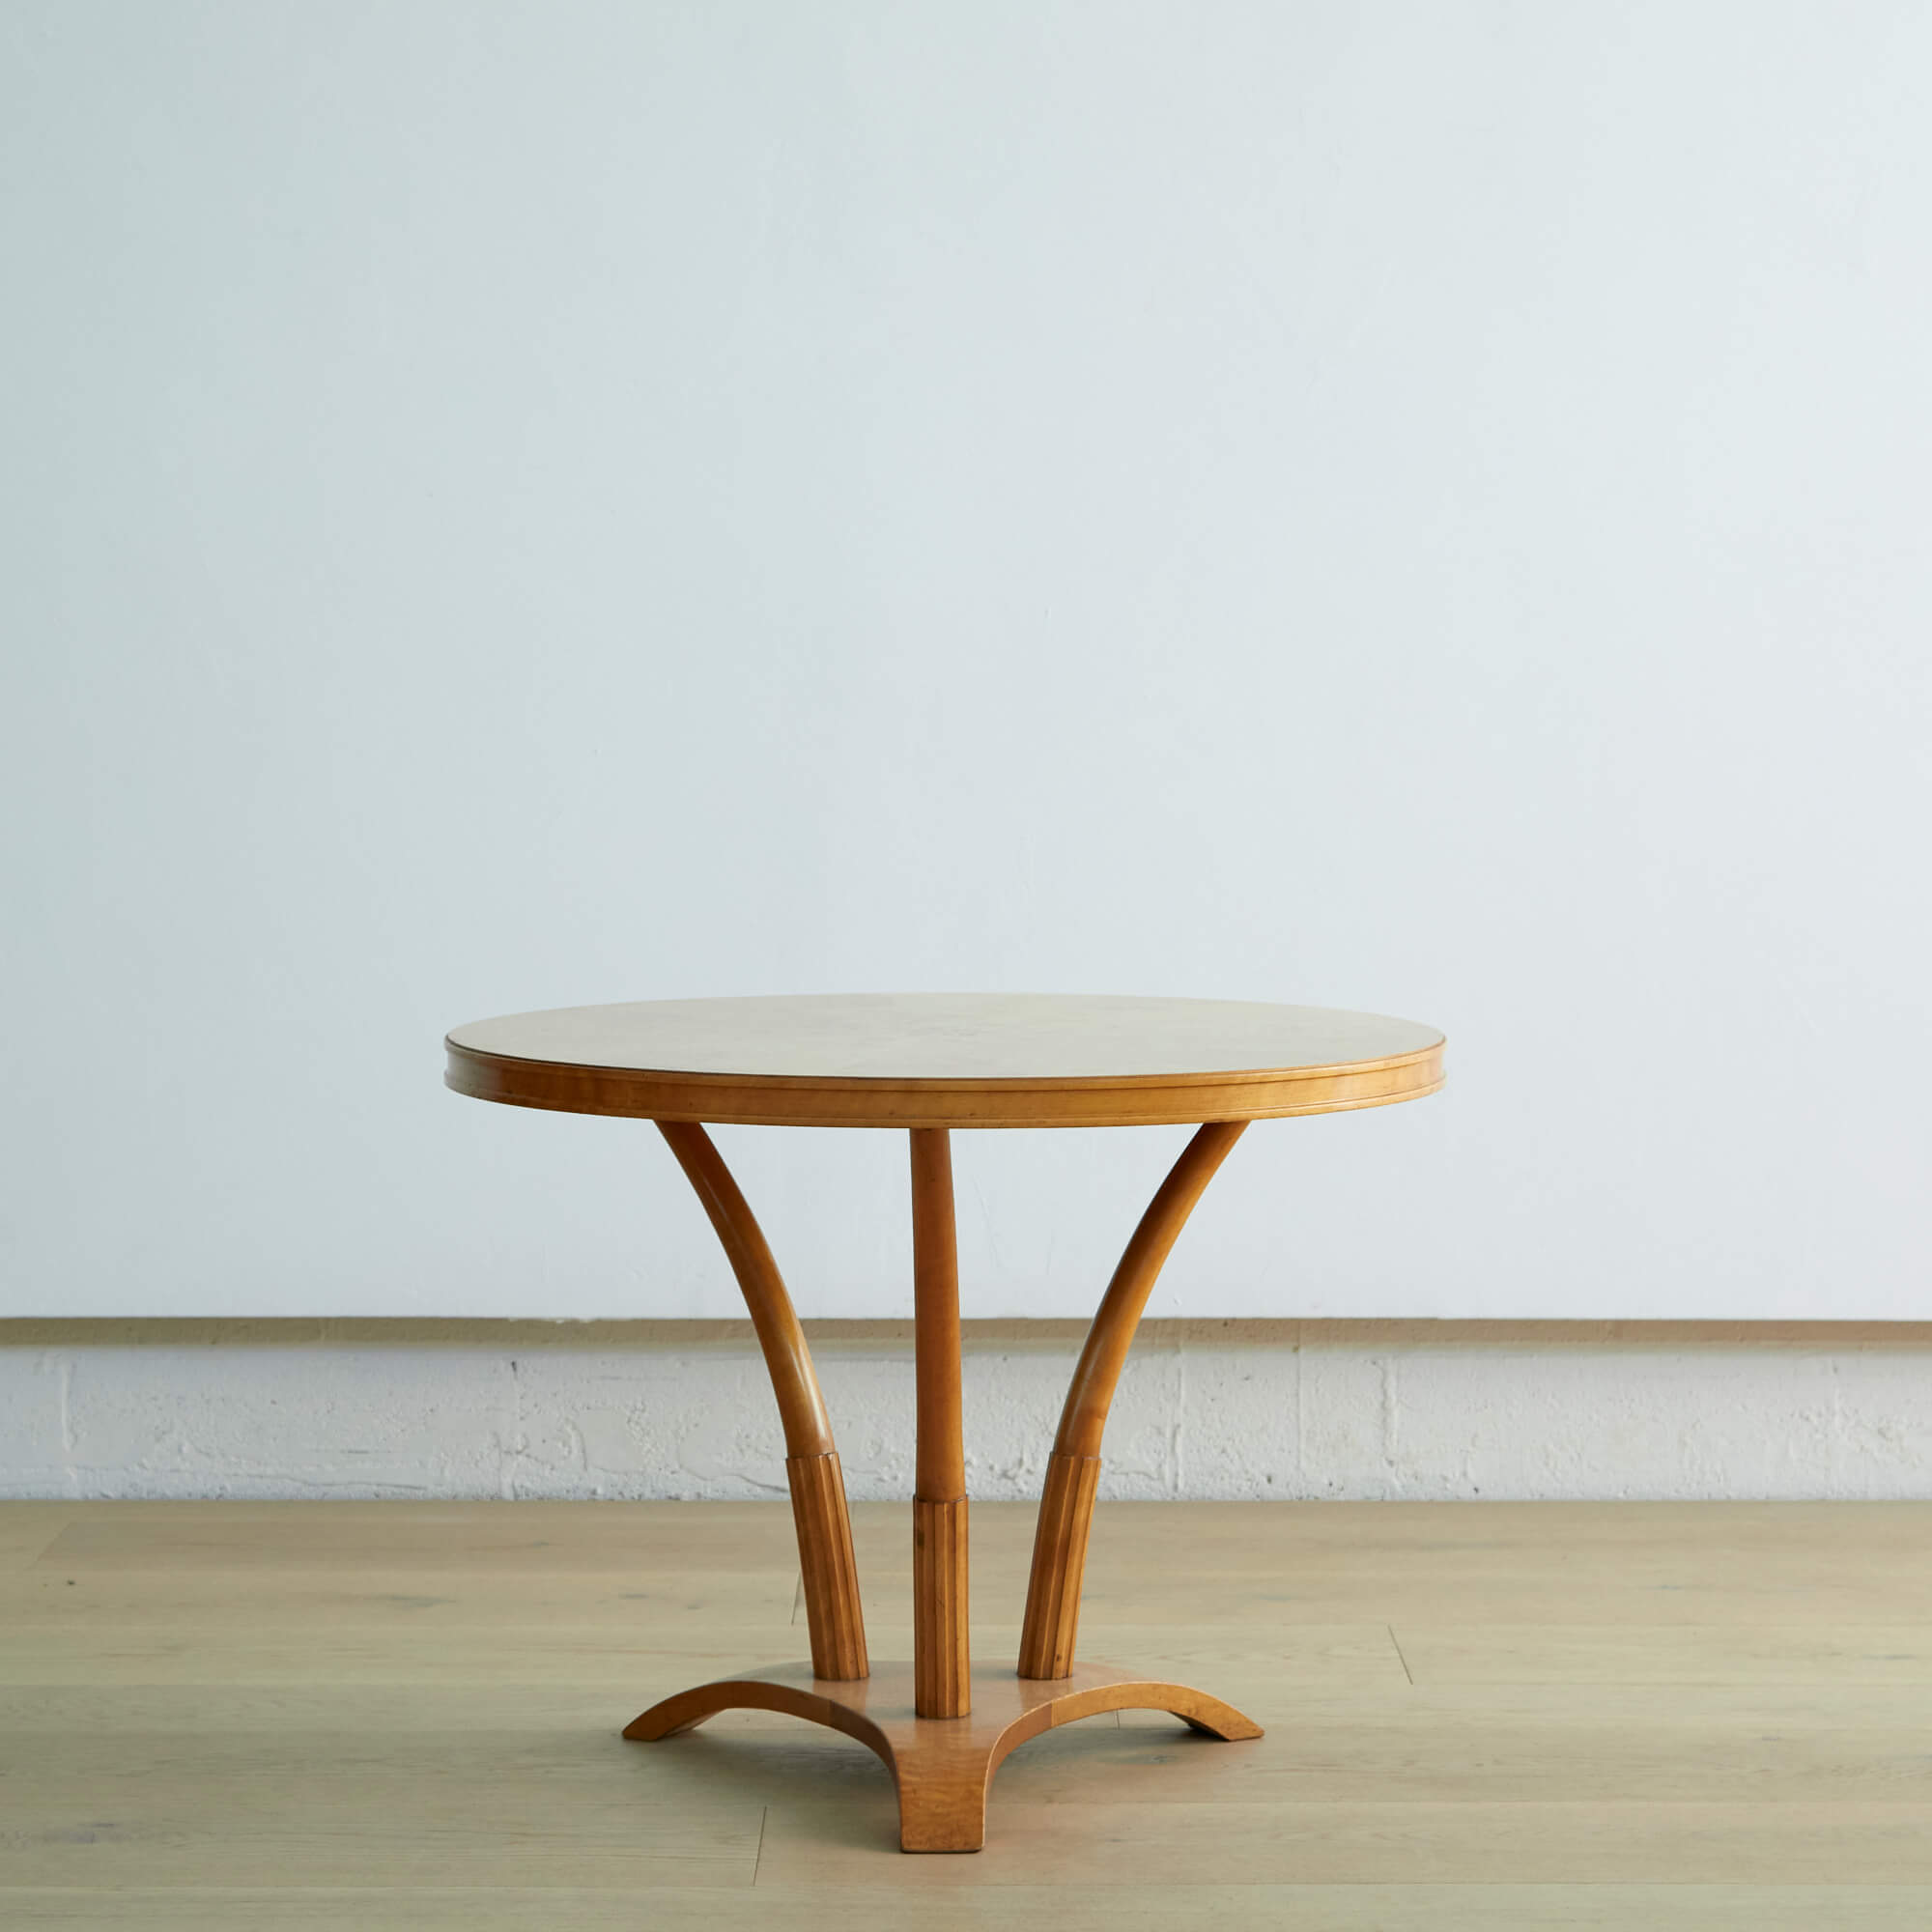 Swedish Moderne Center Table attributed to Axel Larsson for Bodafors